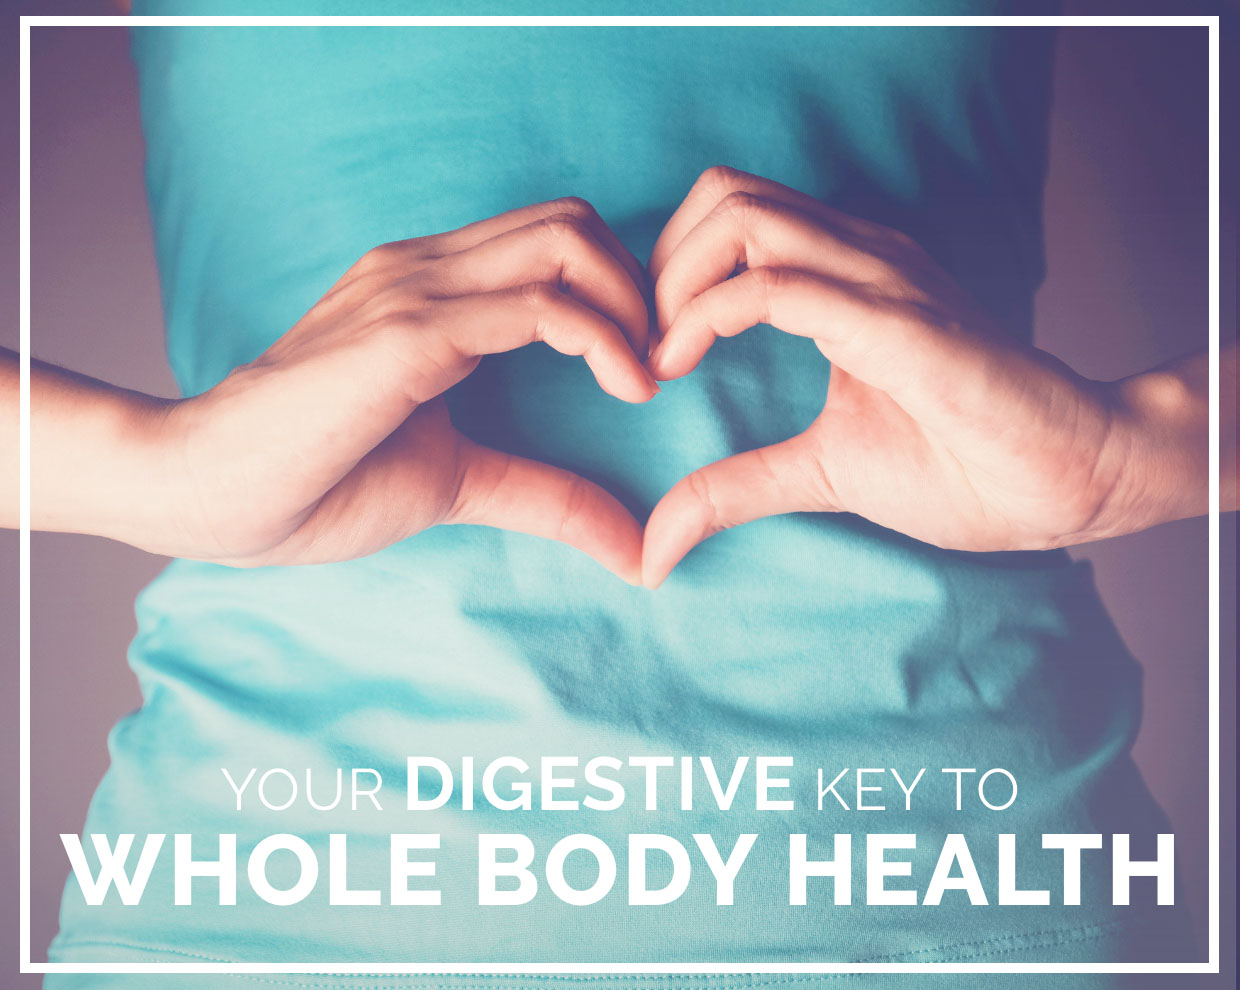 Your Digestive Key to Whole Body Health